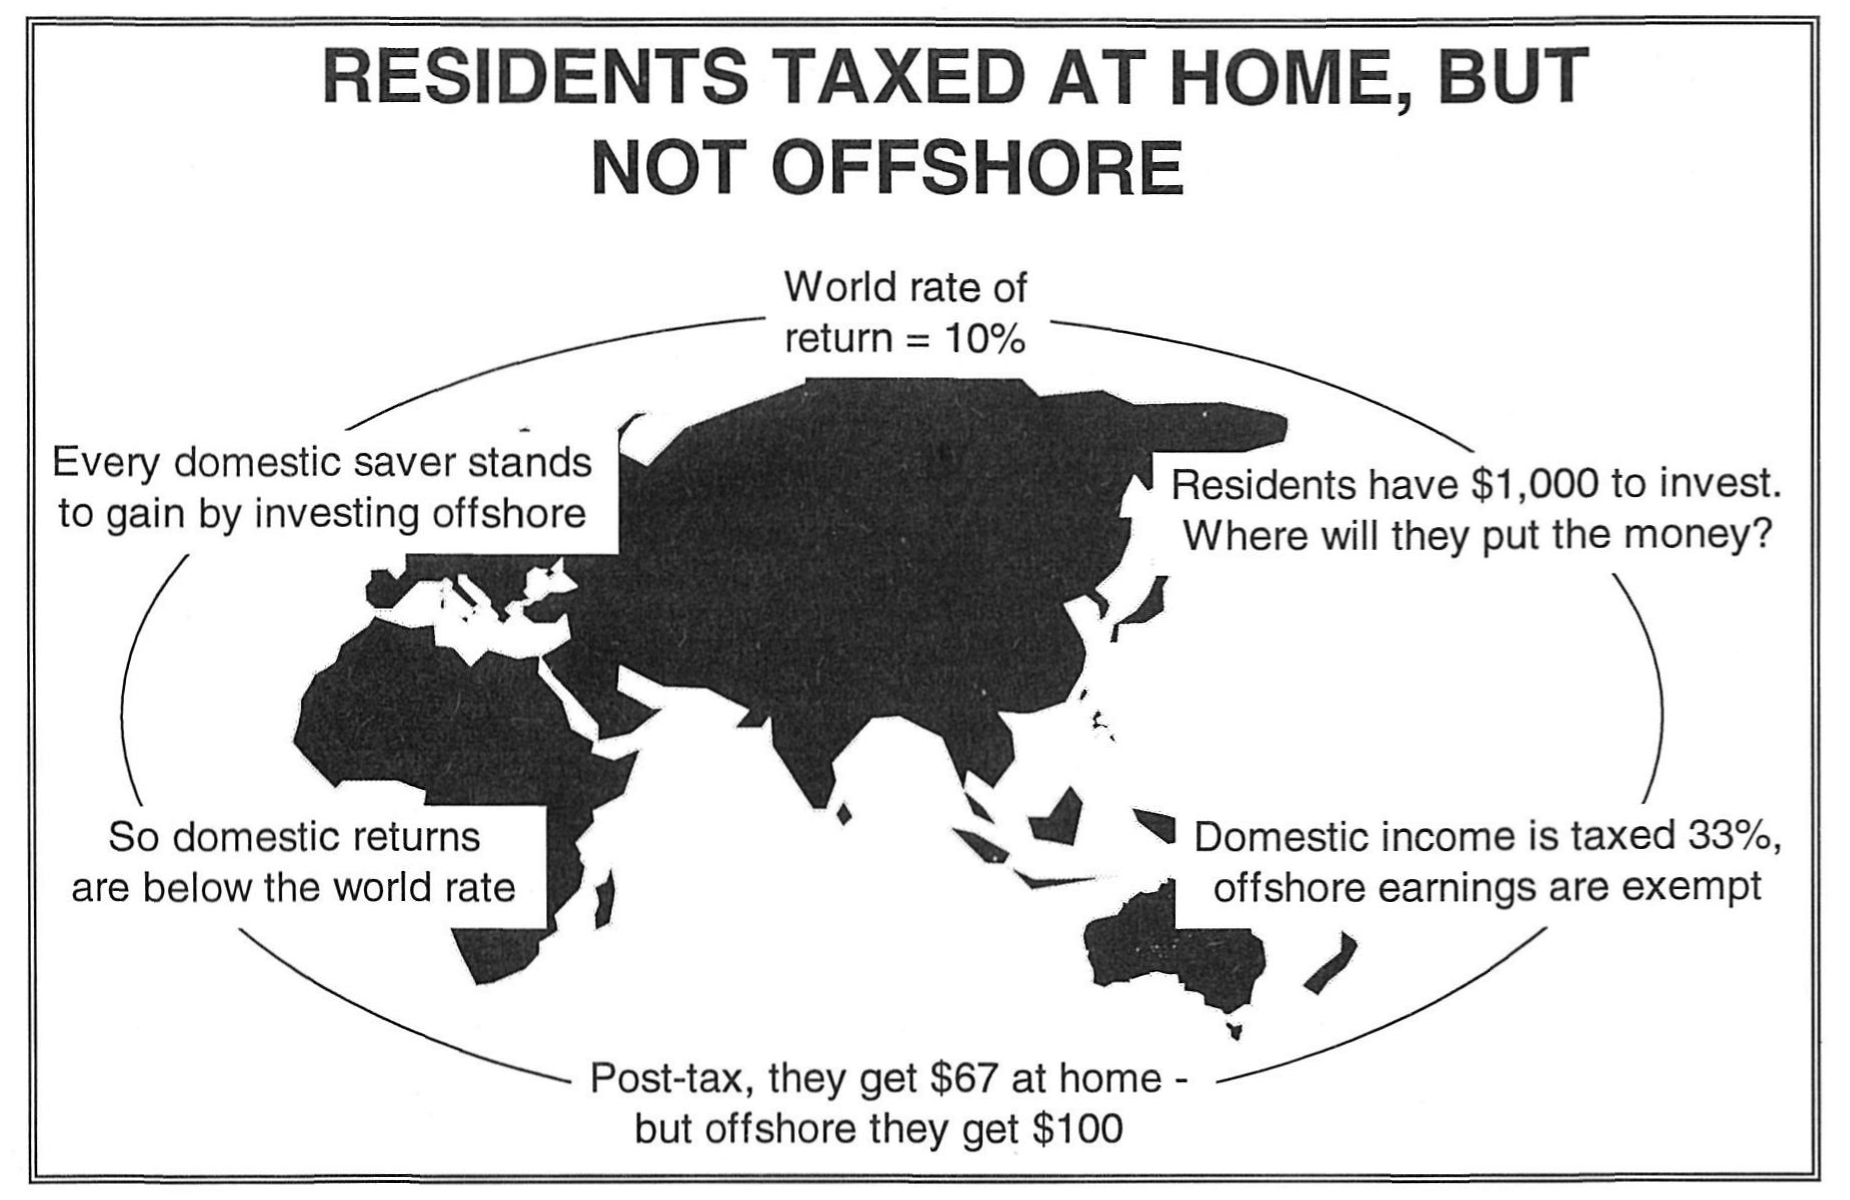 Figure 2: Residents taxed at home, but not offshore